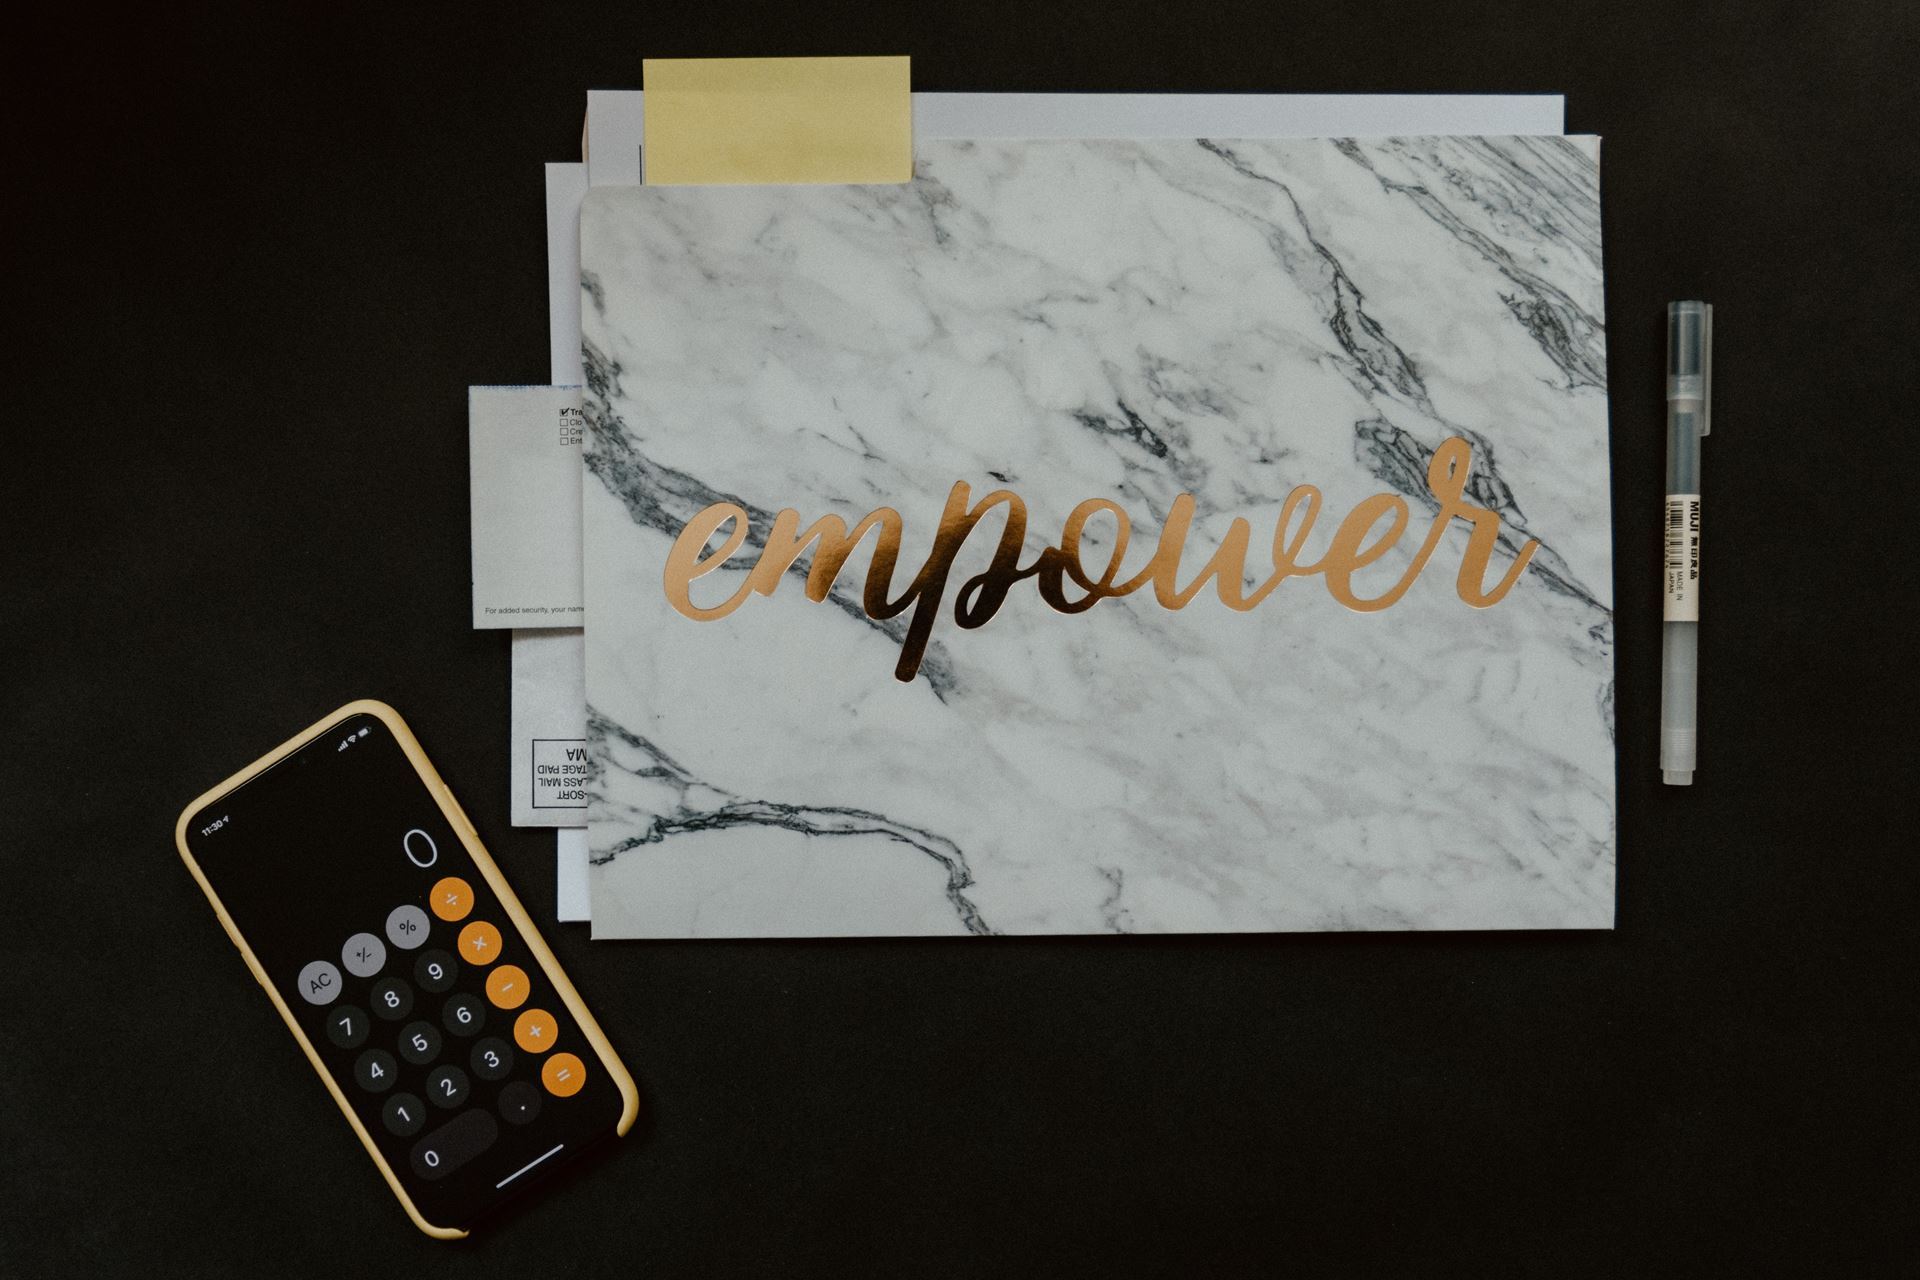 A piece of paper with a stylish marbled background and the word "empower" written on it, a pen, and a smartphone with the calculator app open.